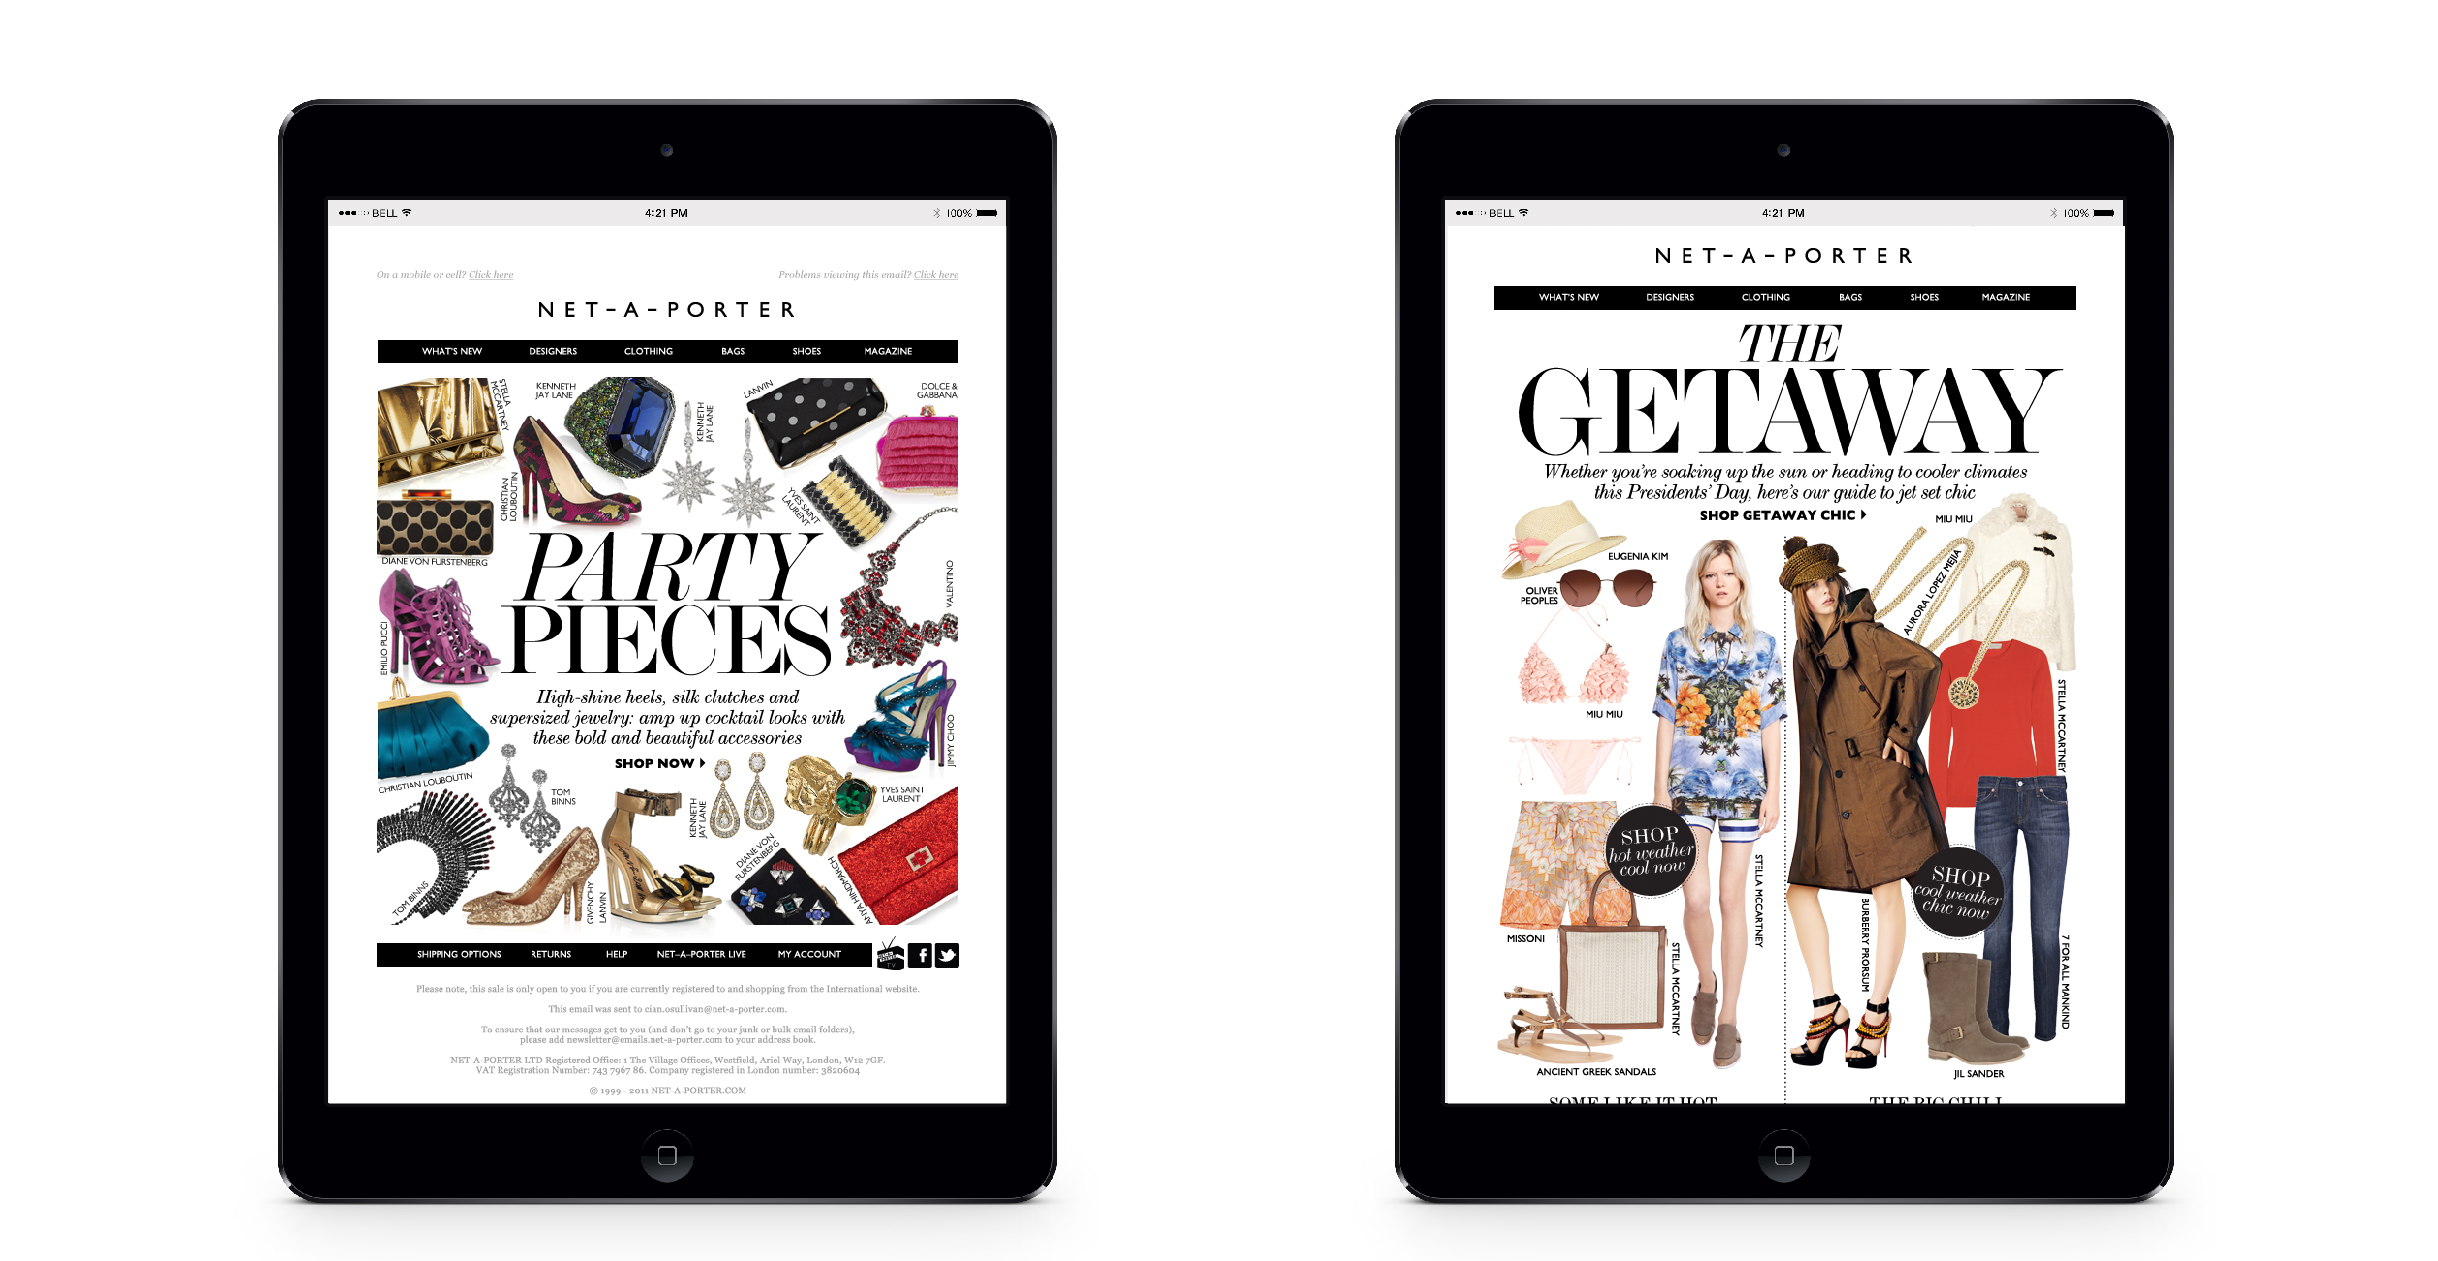 Email designs for luxury fashion e-commerce retailer Net-A-Porter